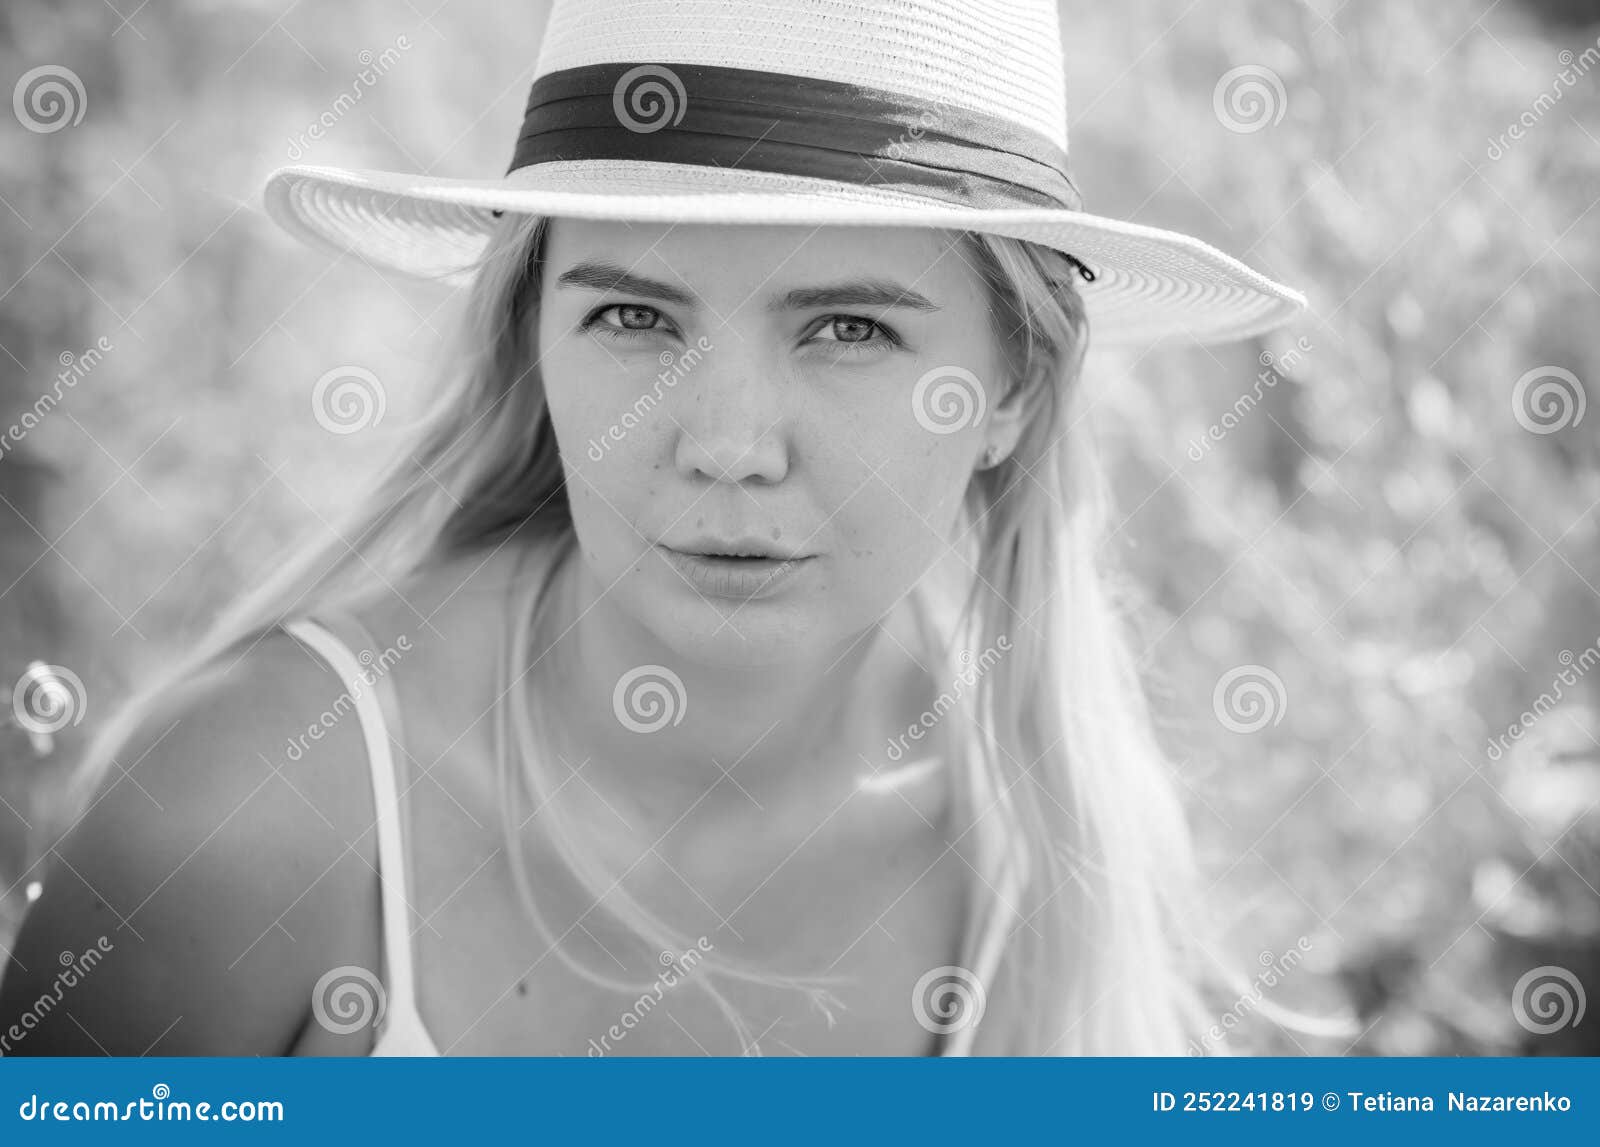 Cute Blonde Girl With Fresh Skin Outdoor Portrait Stock Image Image Of Blond Close 252241819